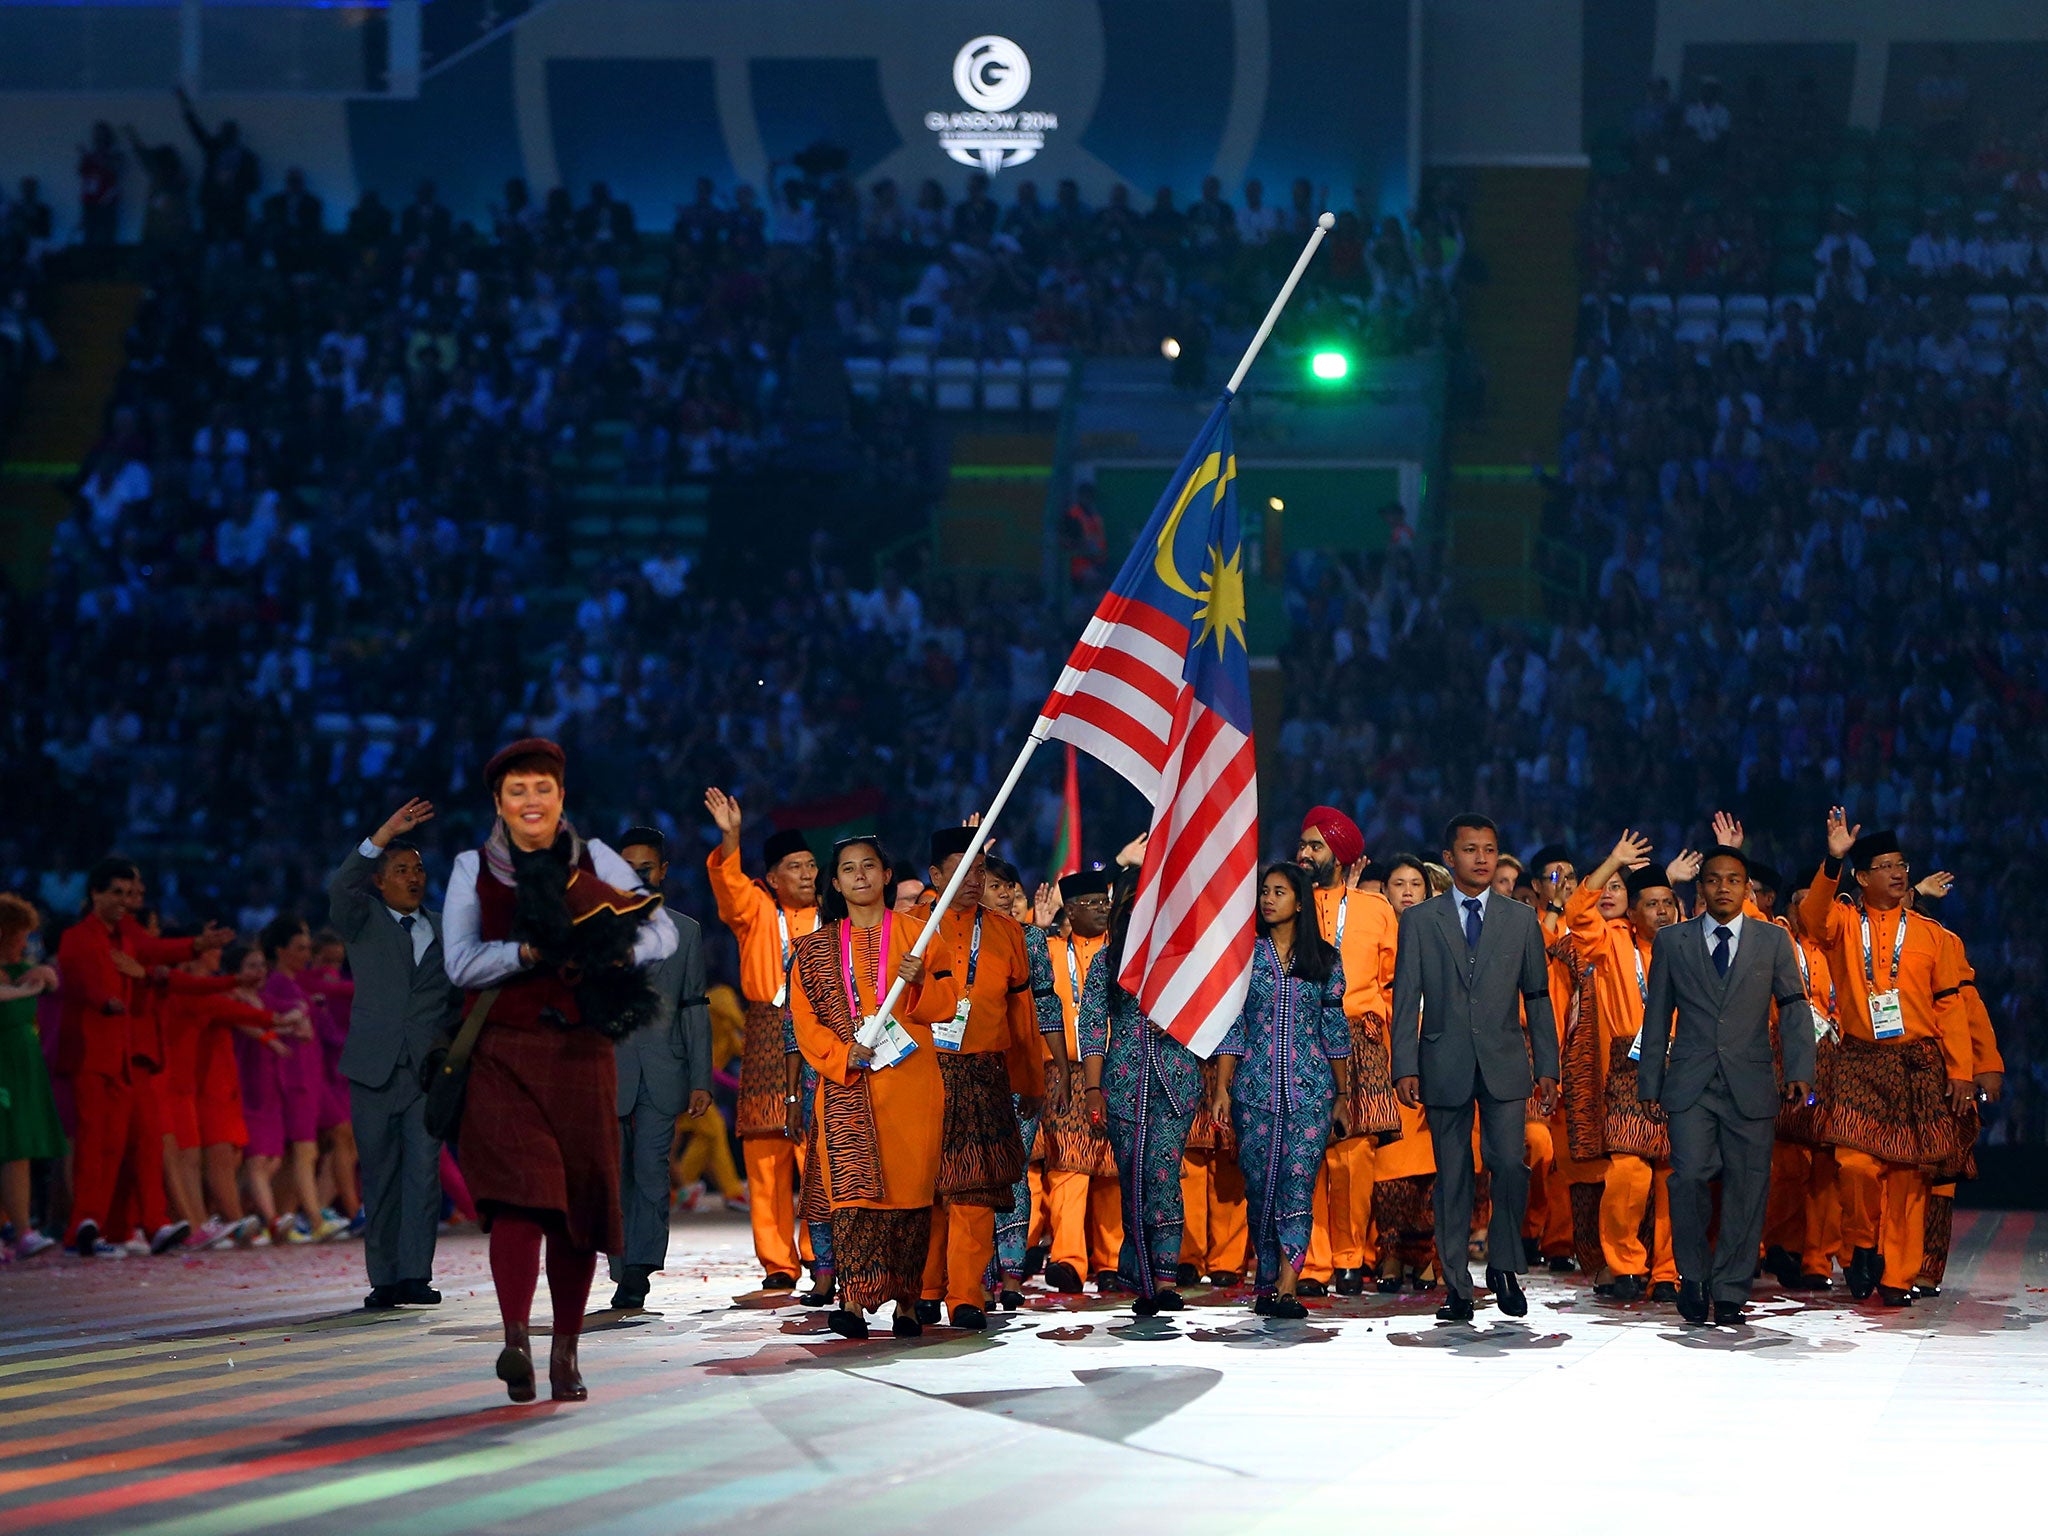 Flag bearer and Cyclist Fatehah Mustapa of Malaysia flies the flag at half mast during the Opening Ceremony for the Glasgow 2014 Commonwealth Games